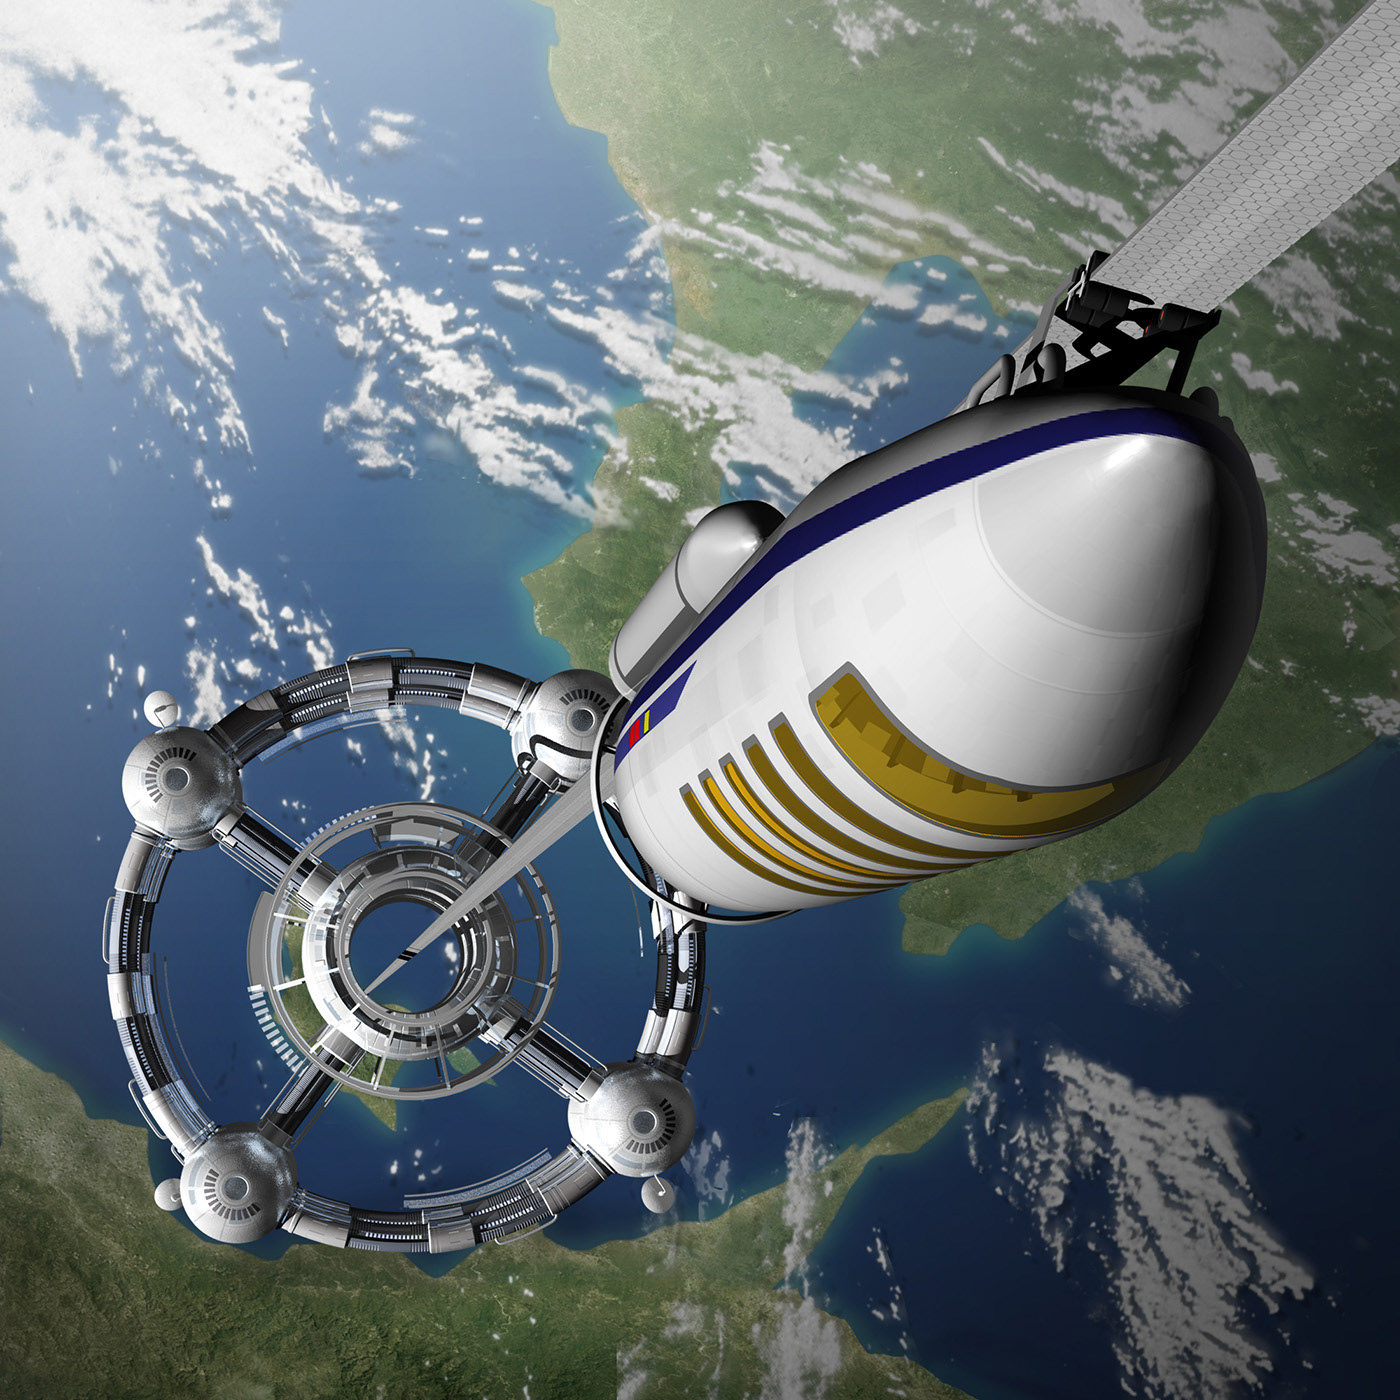 space elevator 3dcg H2_rayer LPG tanker Express Bus real illustration Vehicle machine